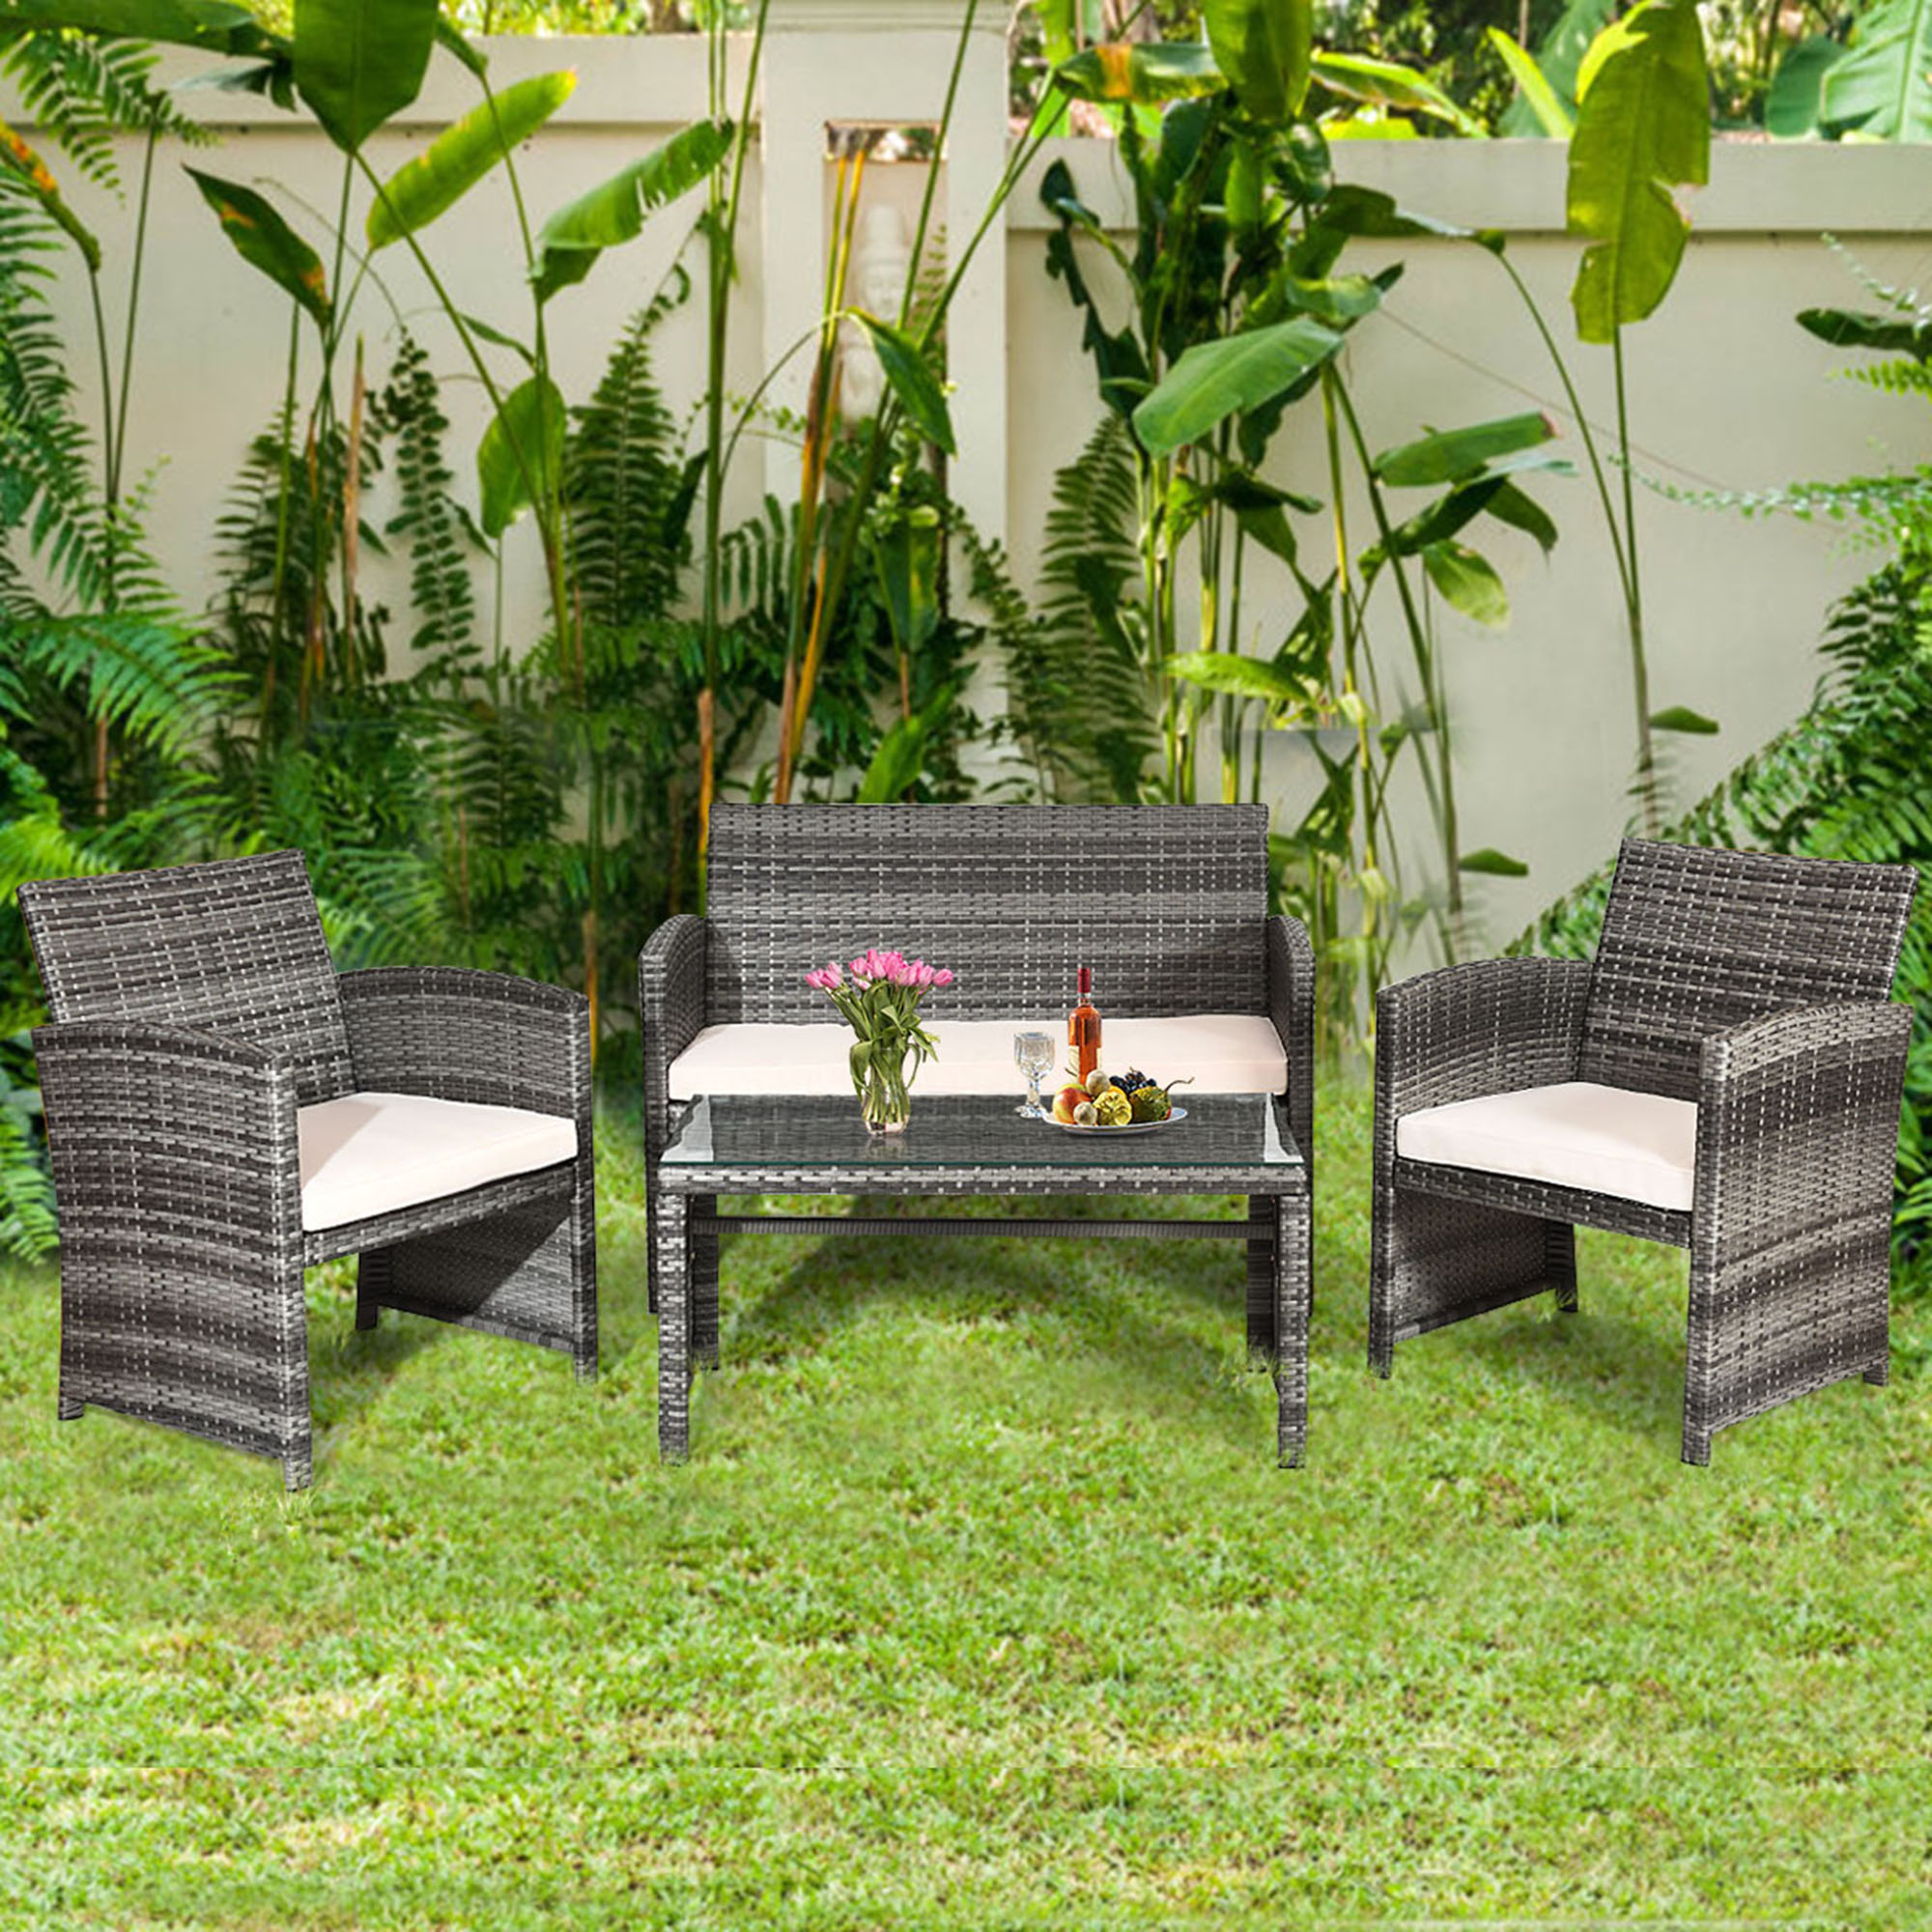 Gymax 8PCS Patio Outdoor Rattan Furniture Set w/ Cushioned Chair Loveseat Table - image 3 of 10